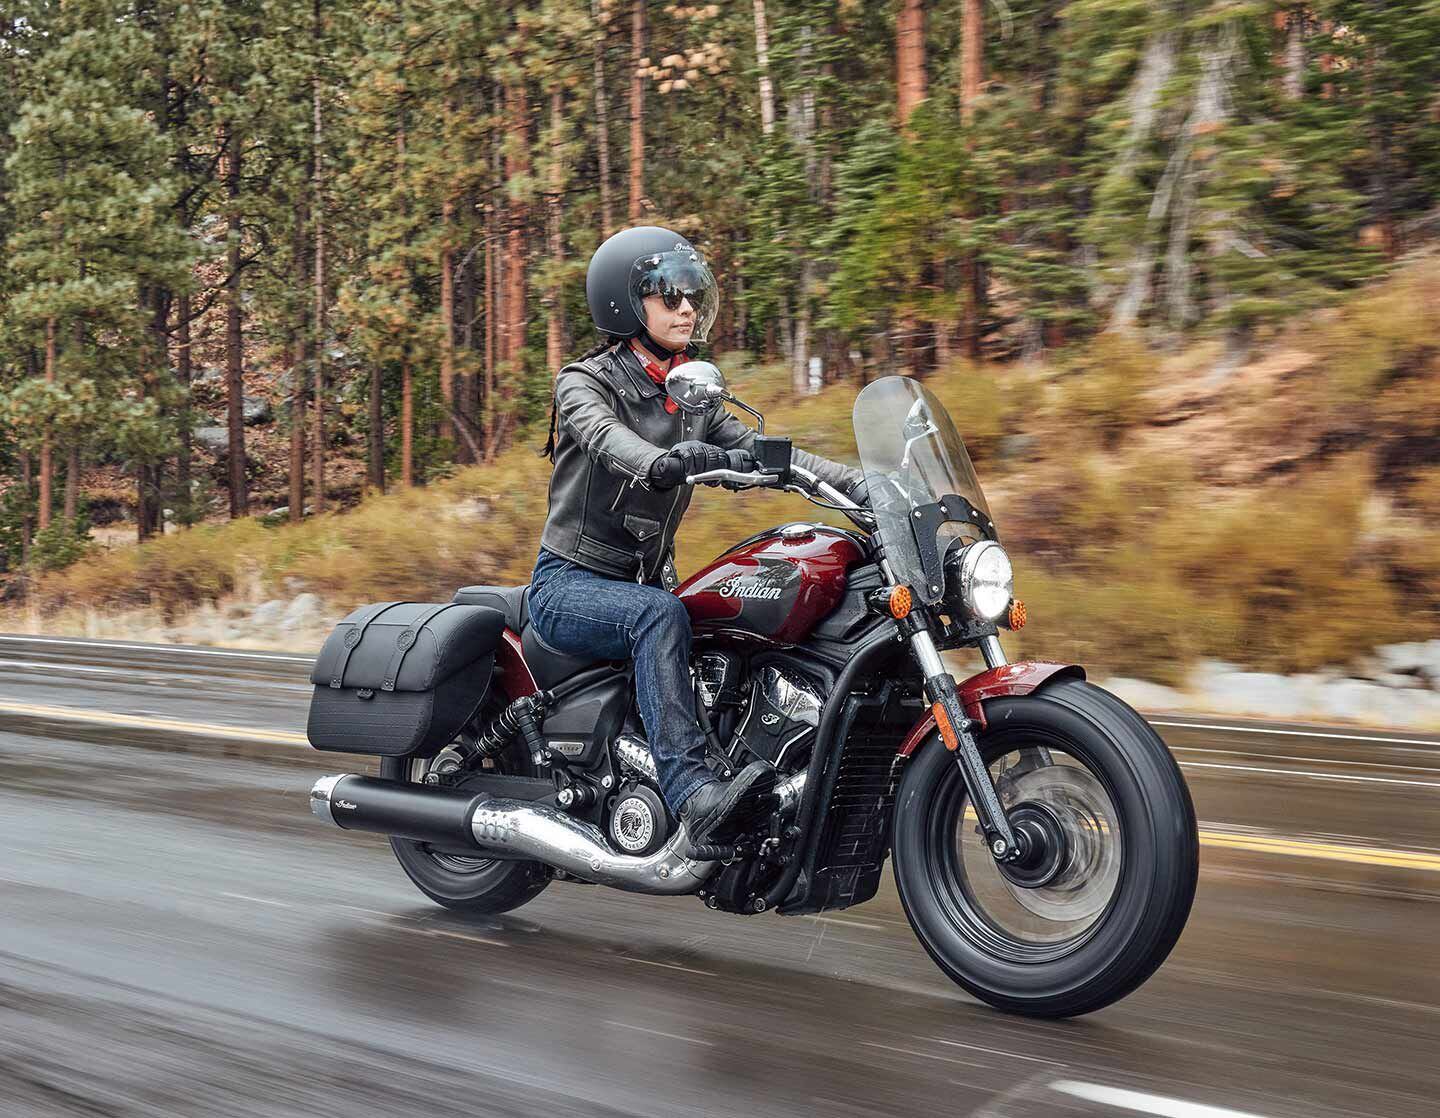 For light-duty touring riders looking for a traditional mount, the 2025 Super Scout brings a windshield, saddlebags, and a passenger seat.